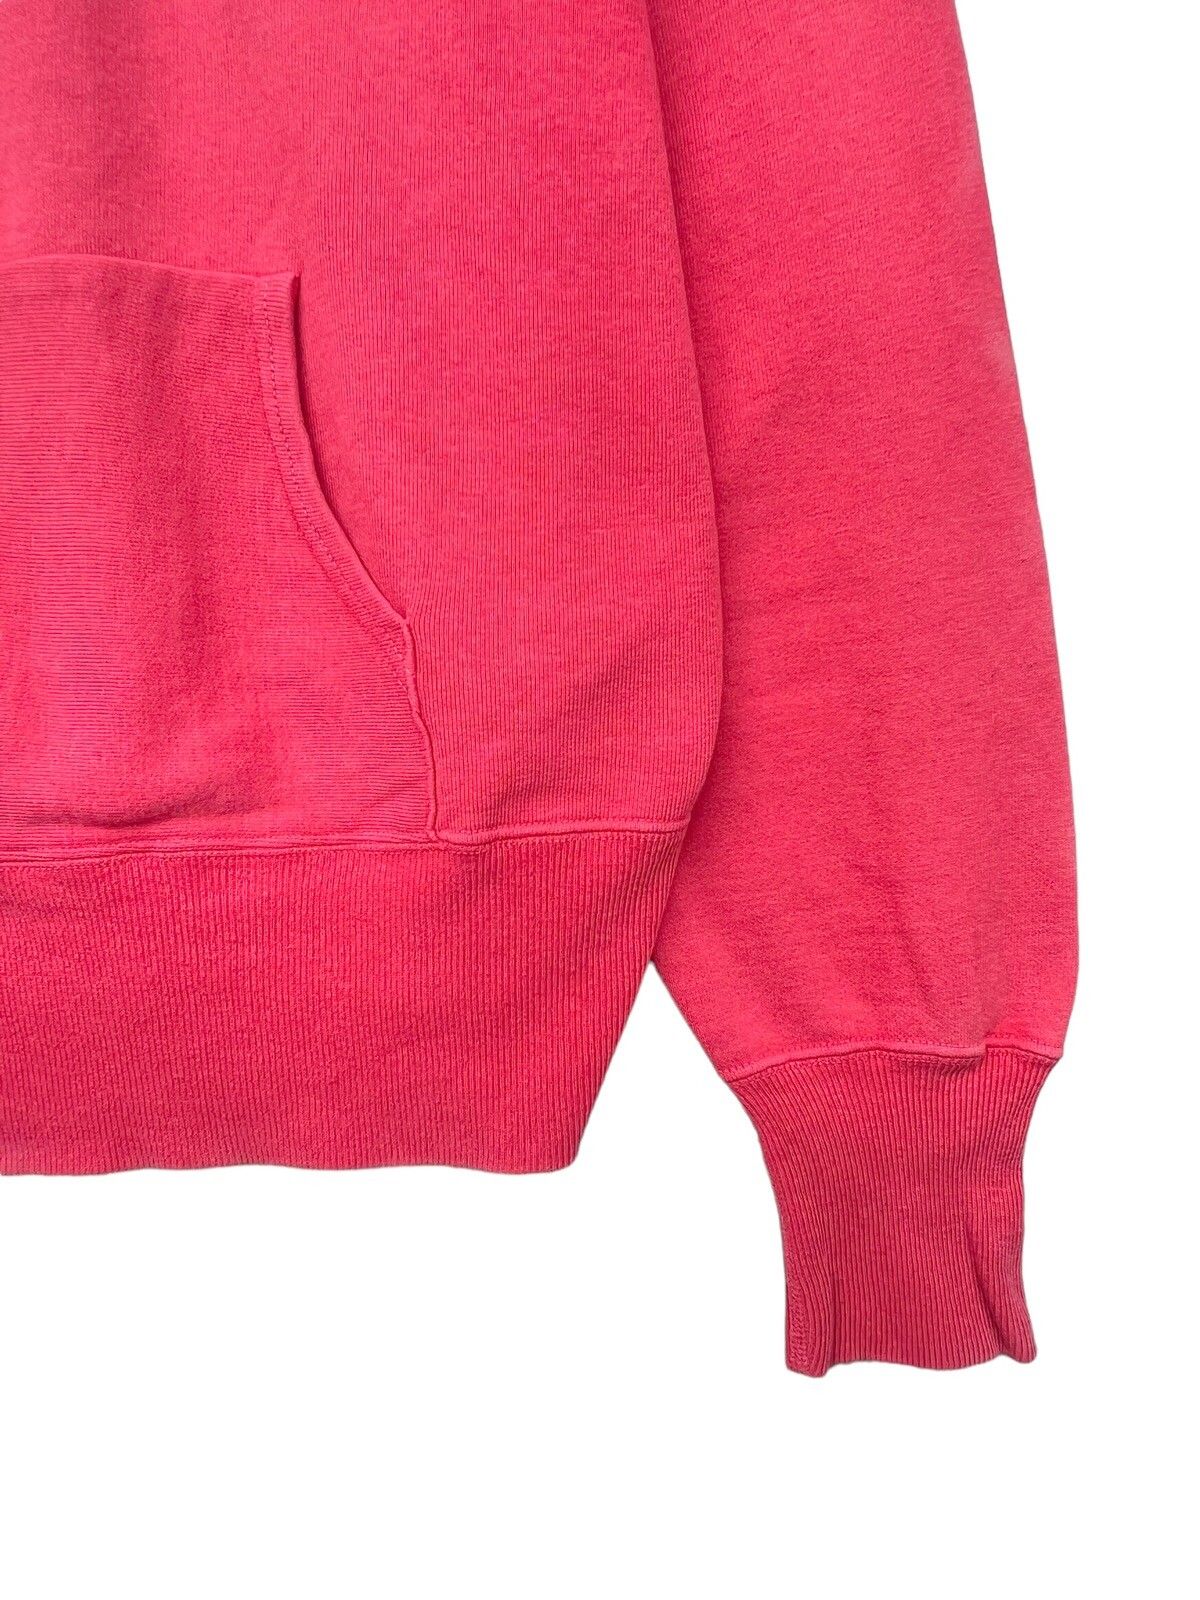 Vintage 45RPM Red Sun Faded Distressed Baggy Boxy Hoodie - 10